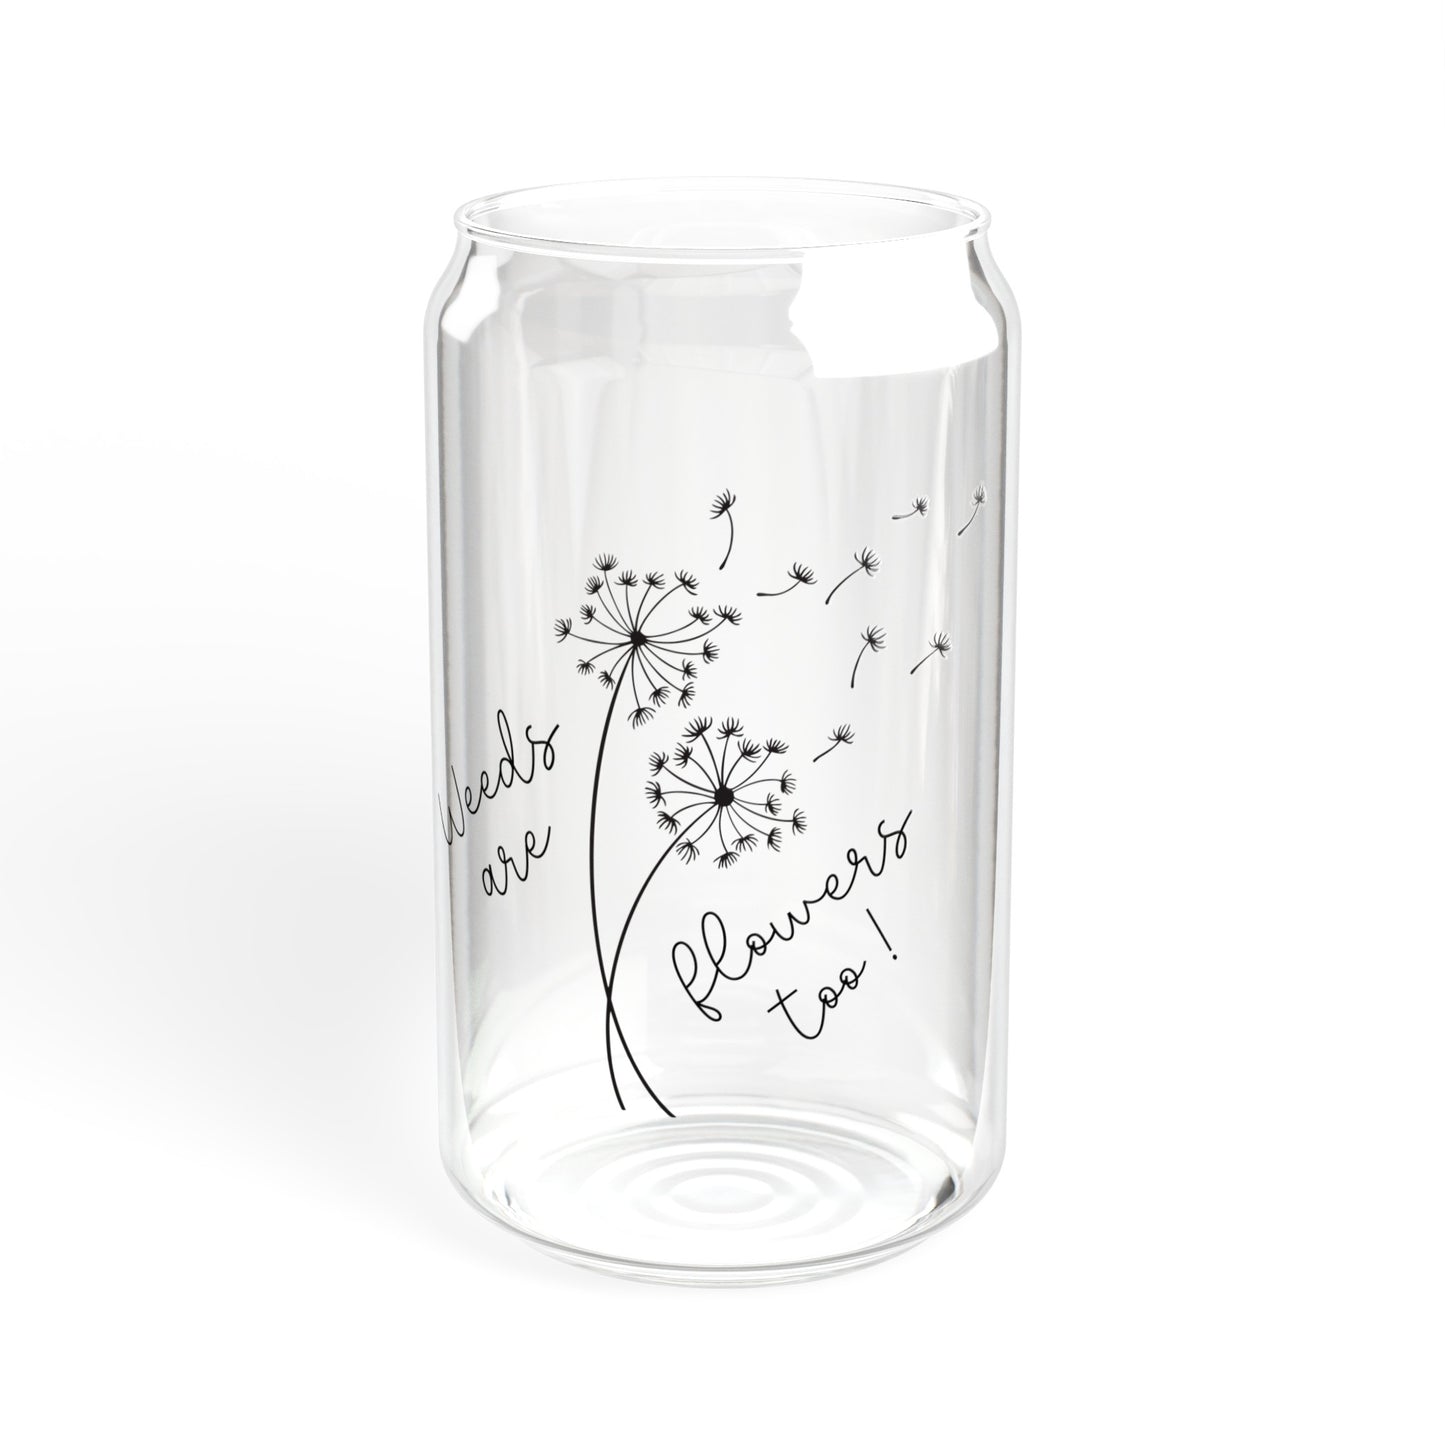 Weeds are Flowers Too Sipper Glass | Dandelion Cup | Gardener Gift | Gift for Nature Lover | 16oz Glass Tumbler